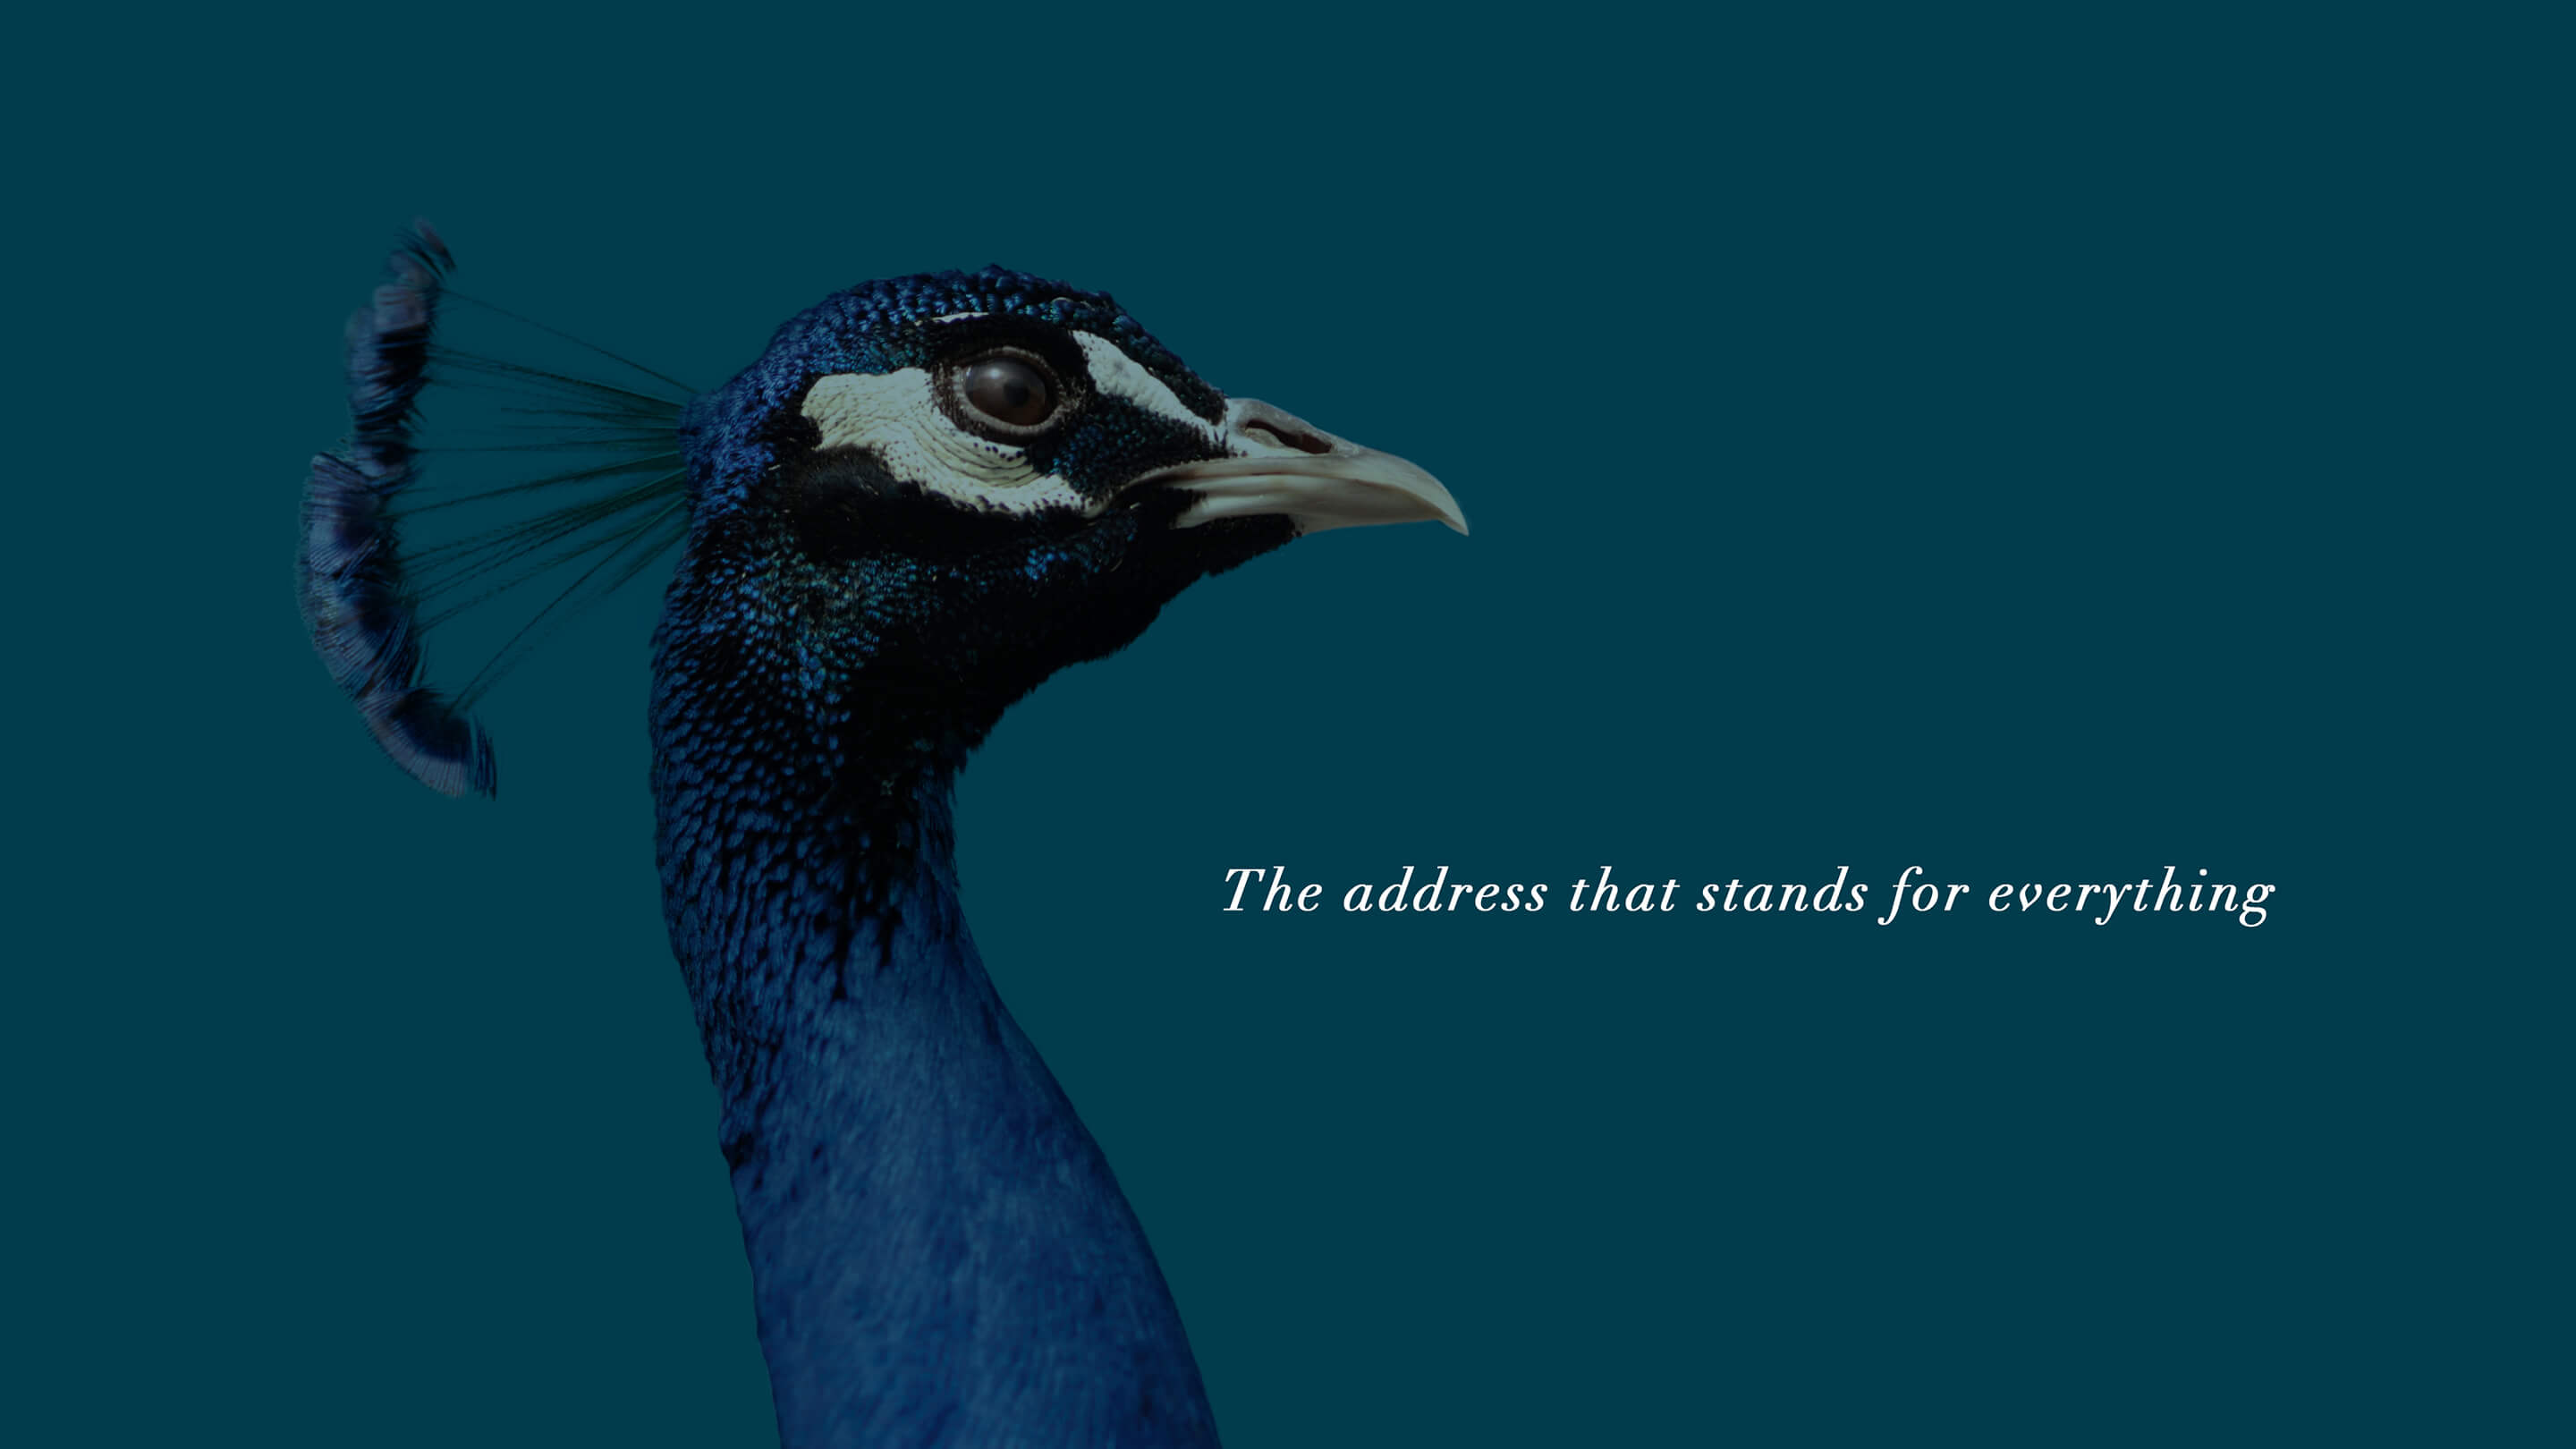 Bird with Broadstone Winter Park saying - The address that stands for everything